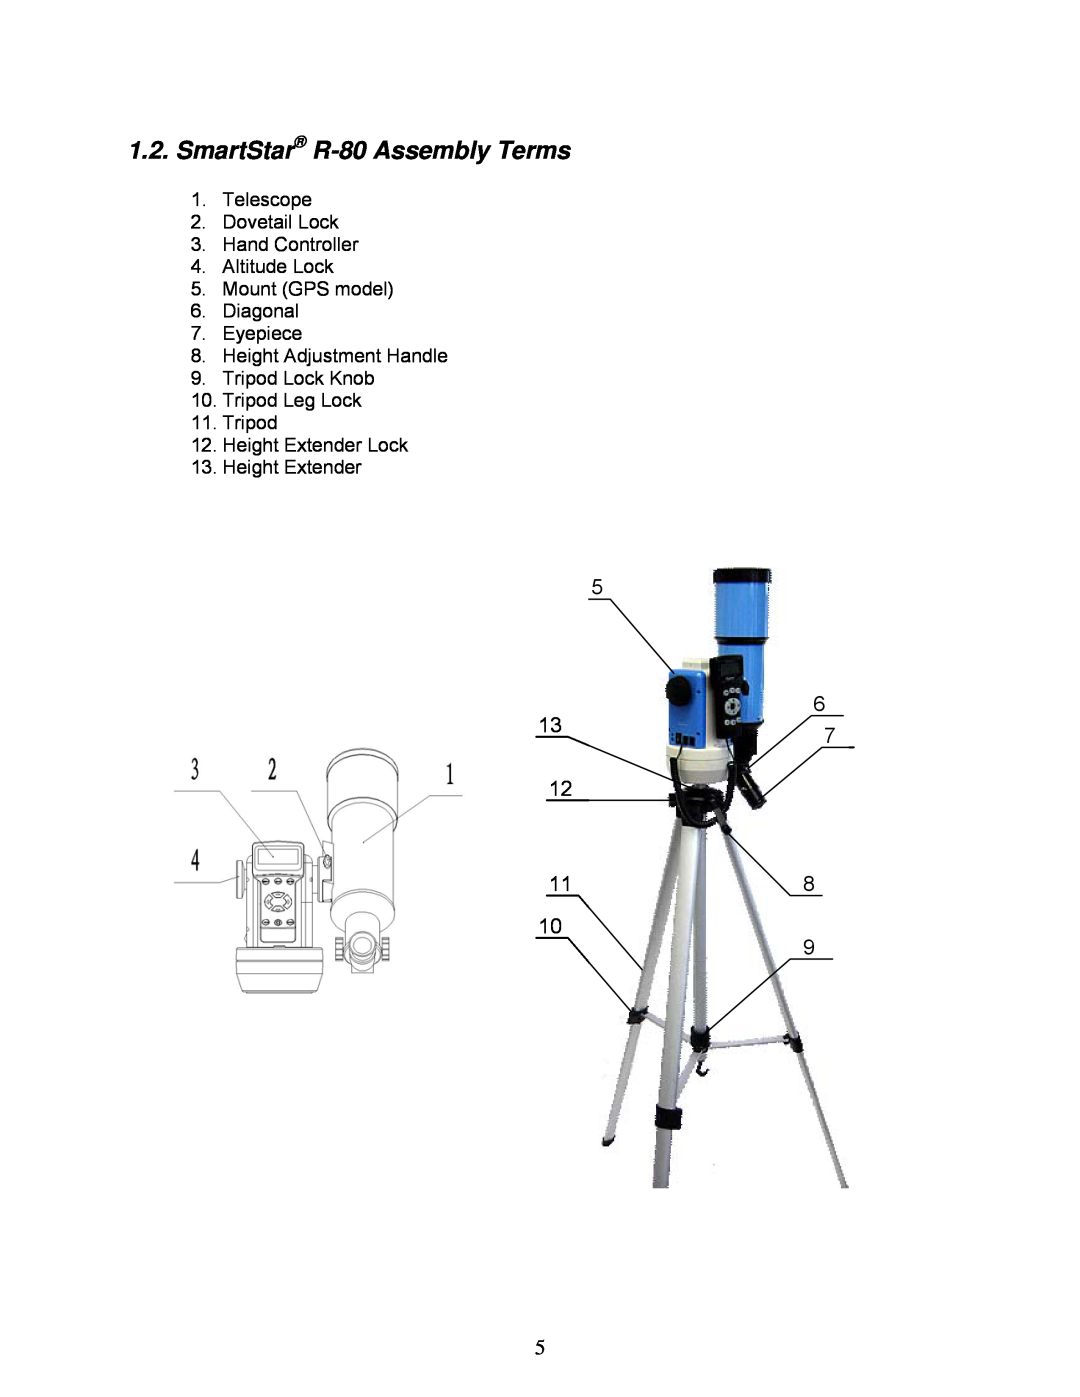 iOptron 8405 instruction manual SmartStar R-80Assembly Terms, 5 13 12, 6 7, Telescope 2.Dovetail Lock 3.Hand Controller 